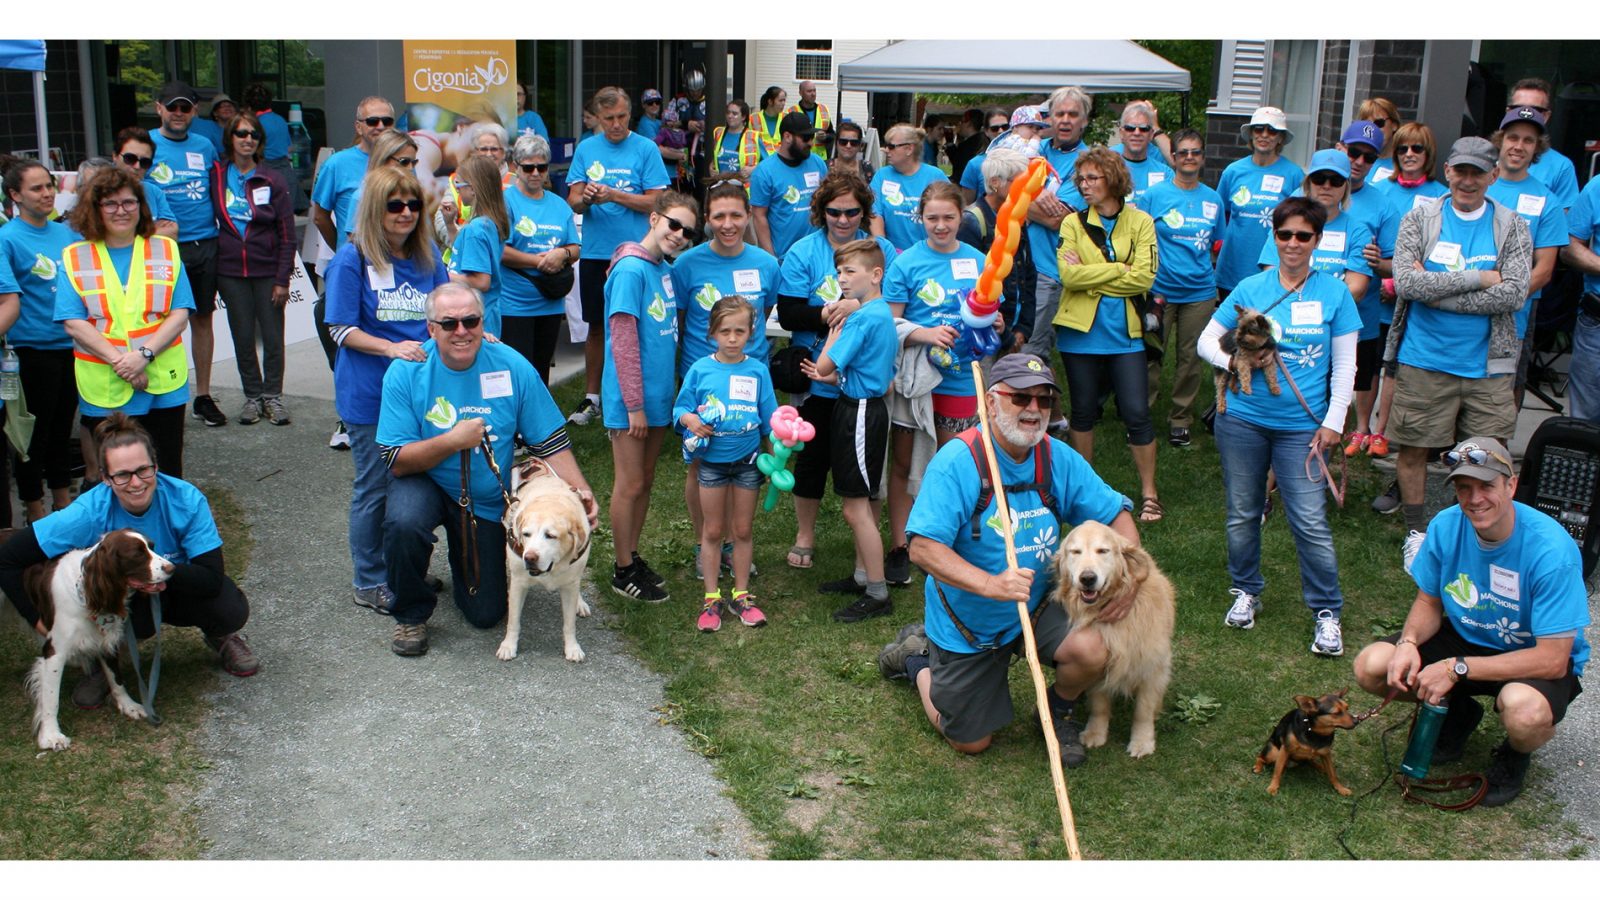 Sherbrooke residents ­invited to walk for Scleroderma